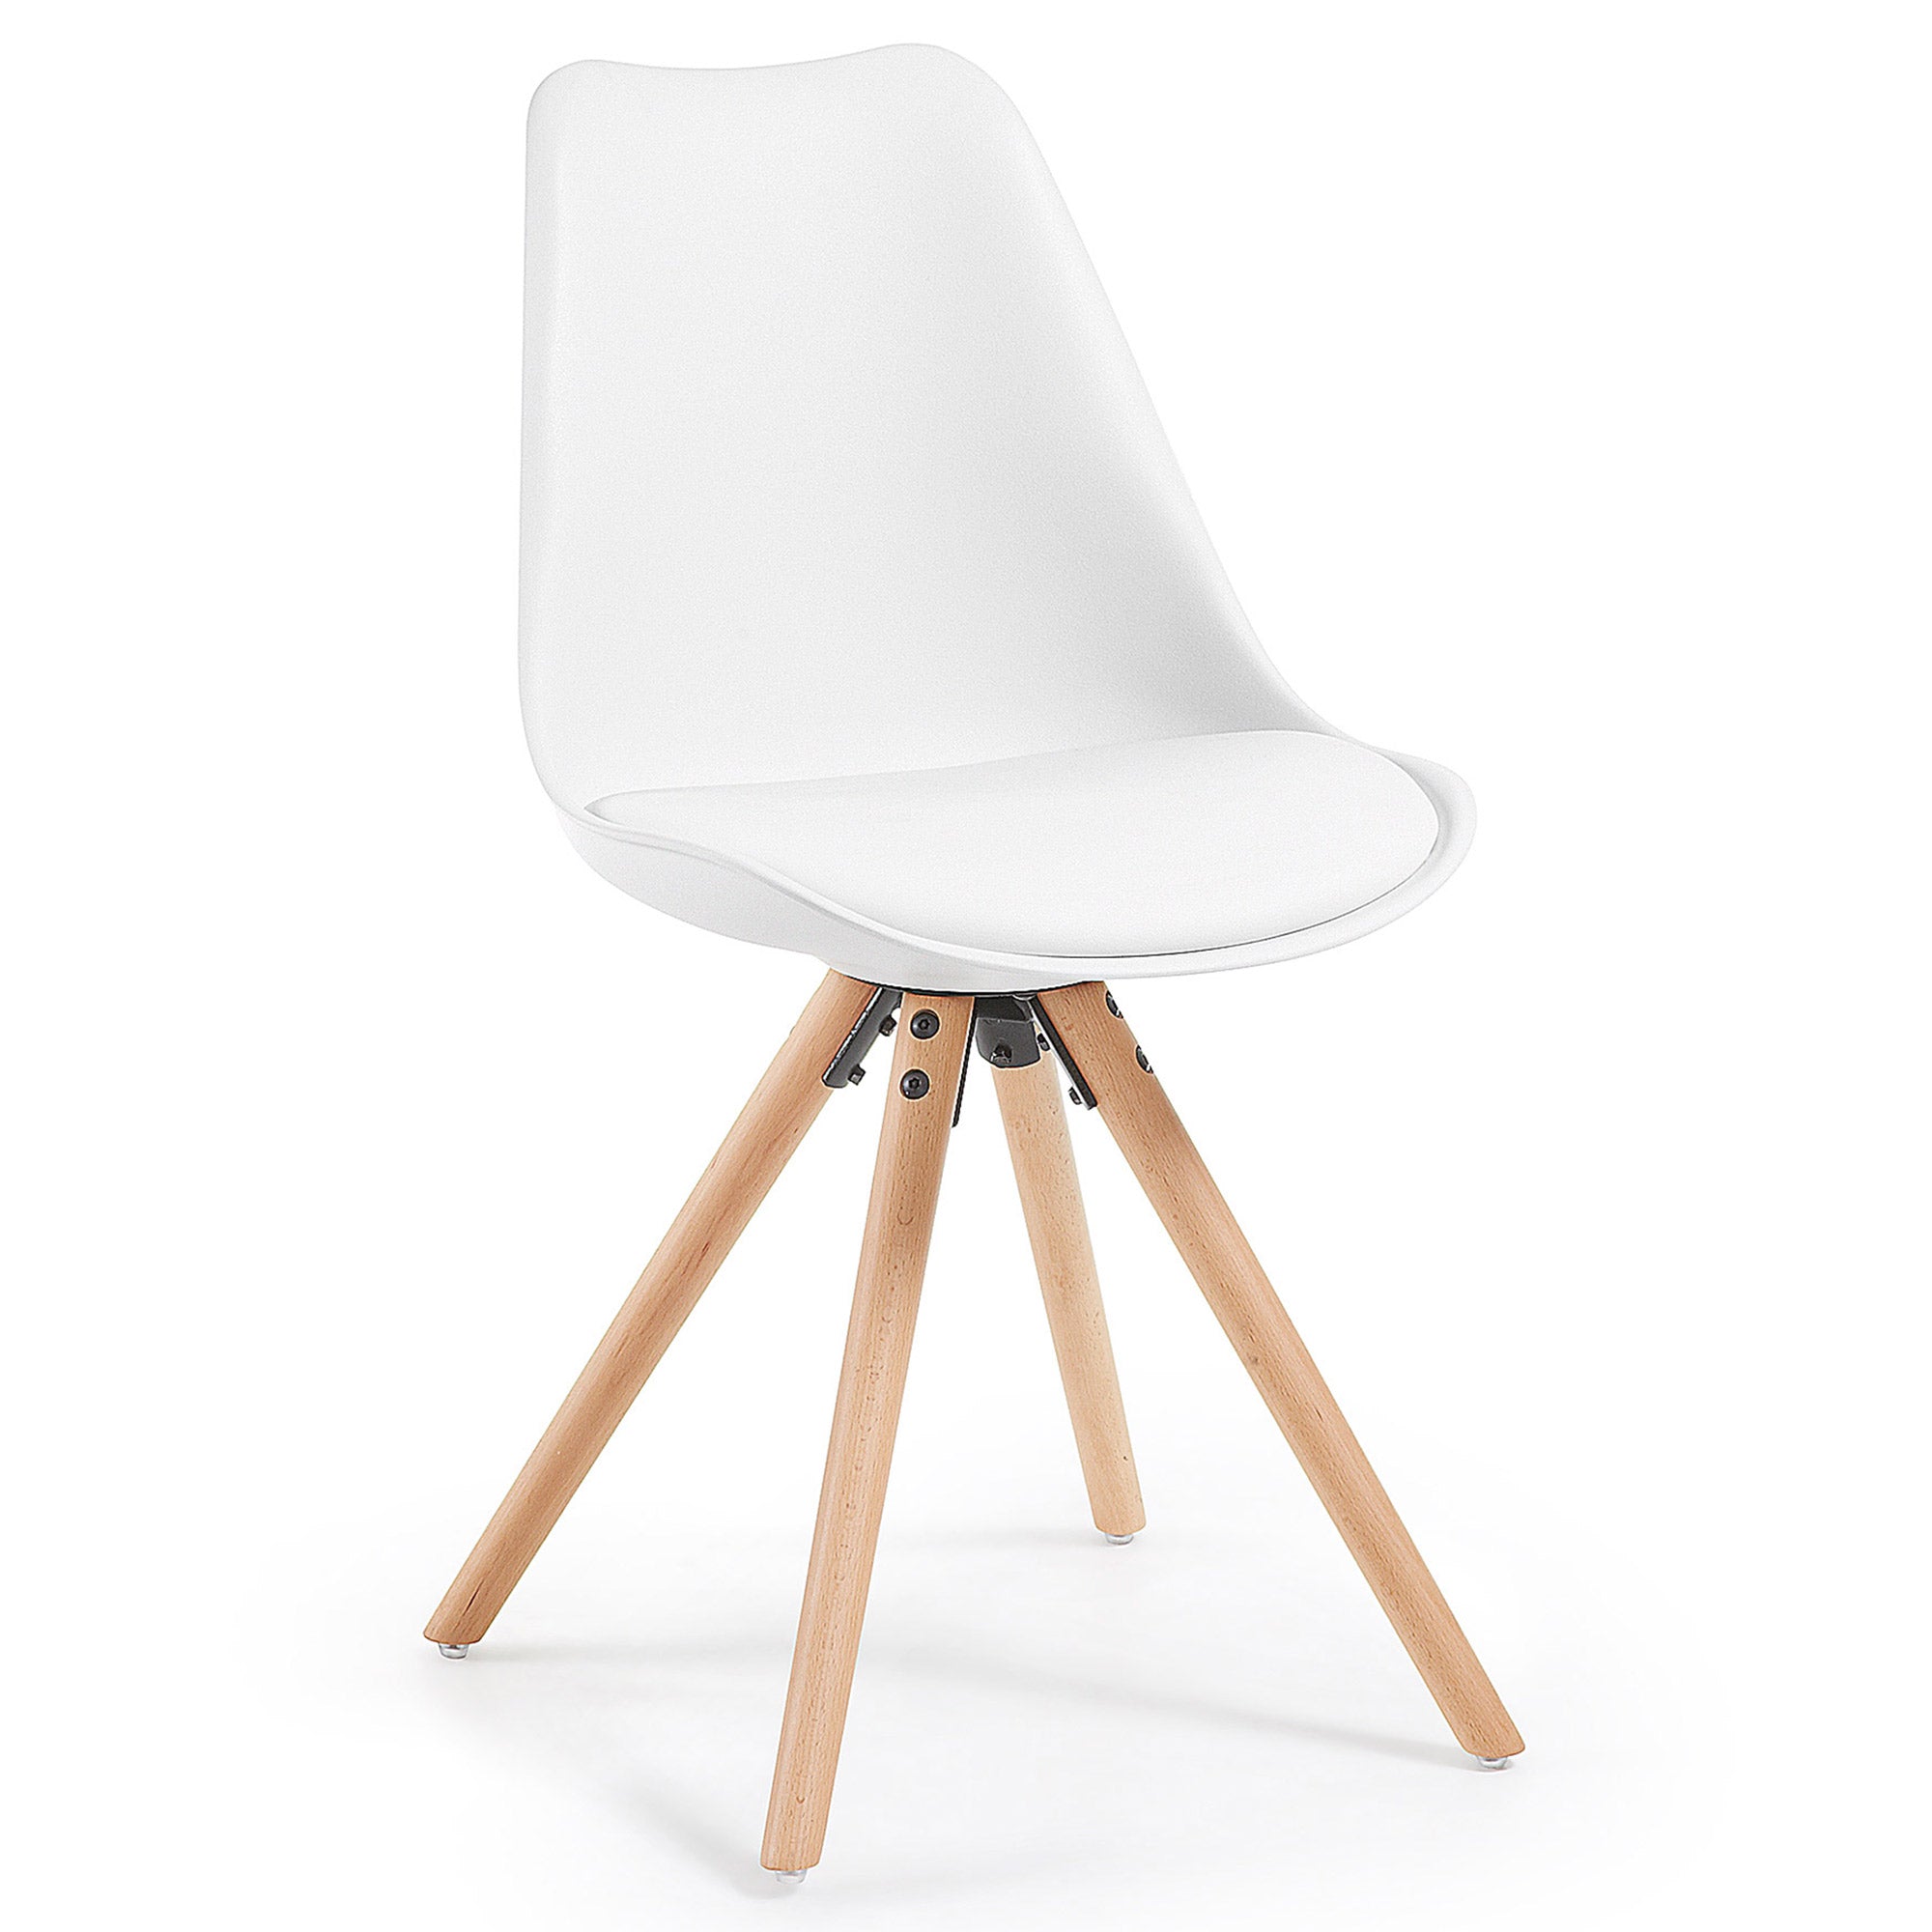 Ralf chair white and natural